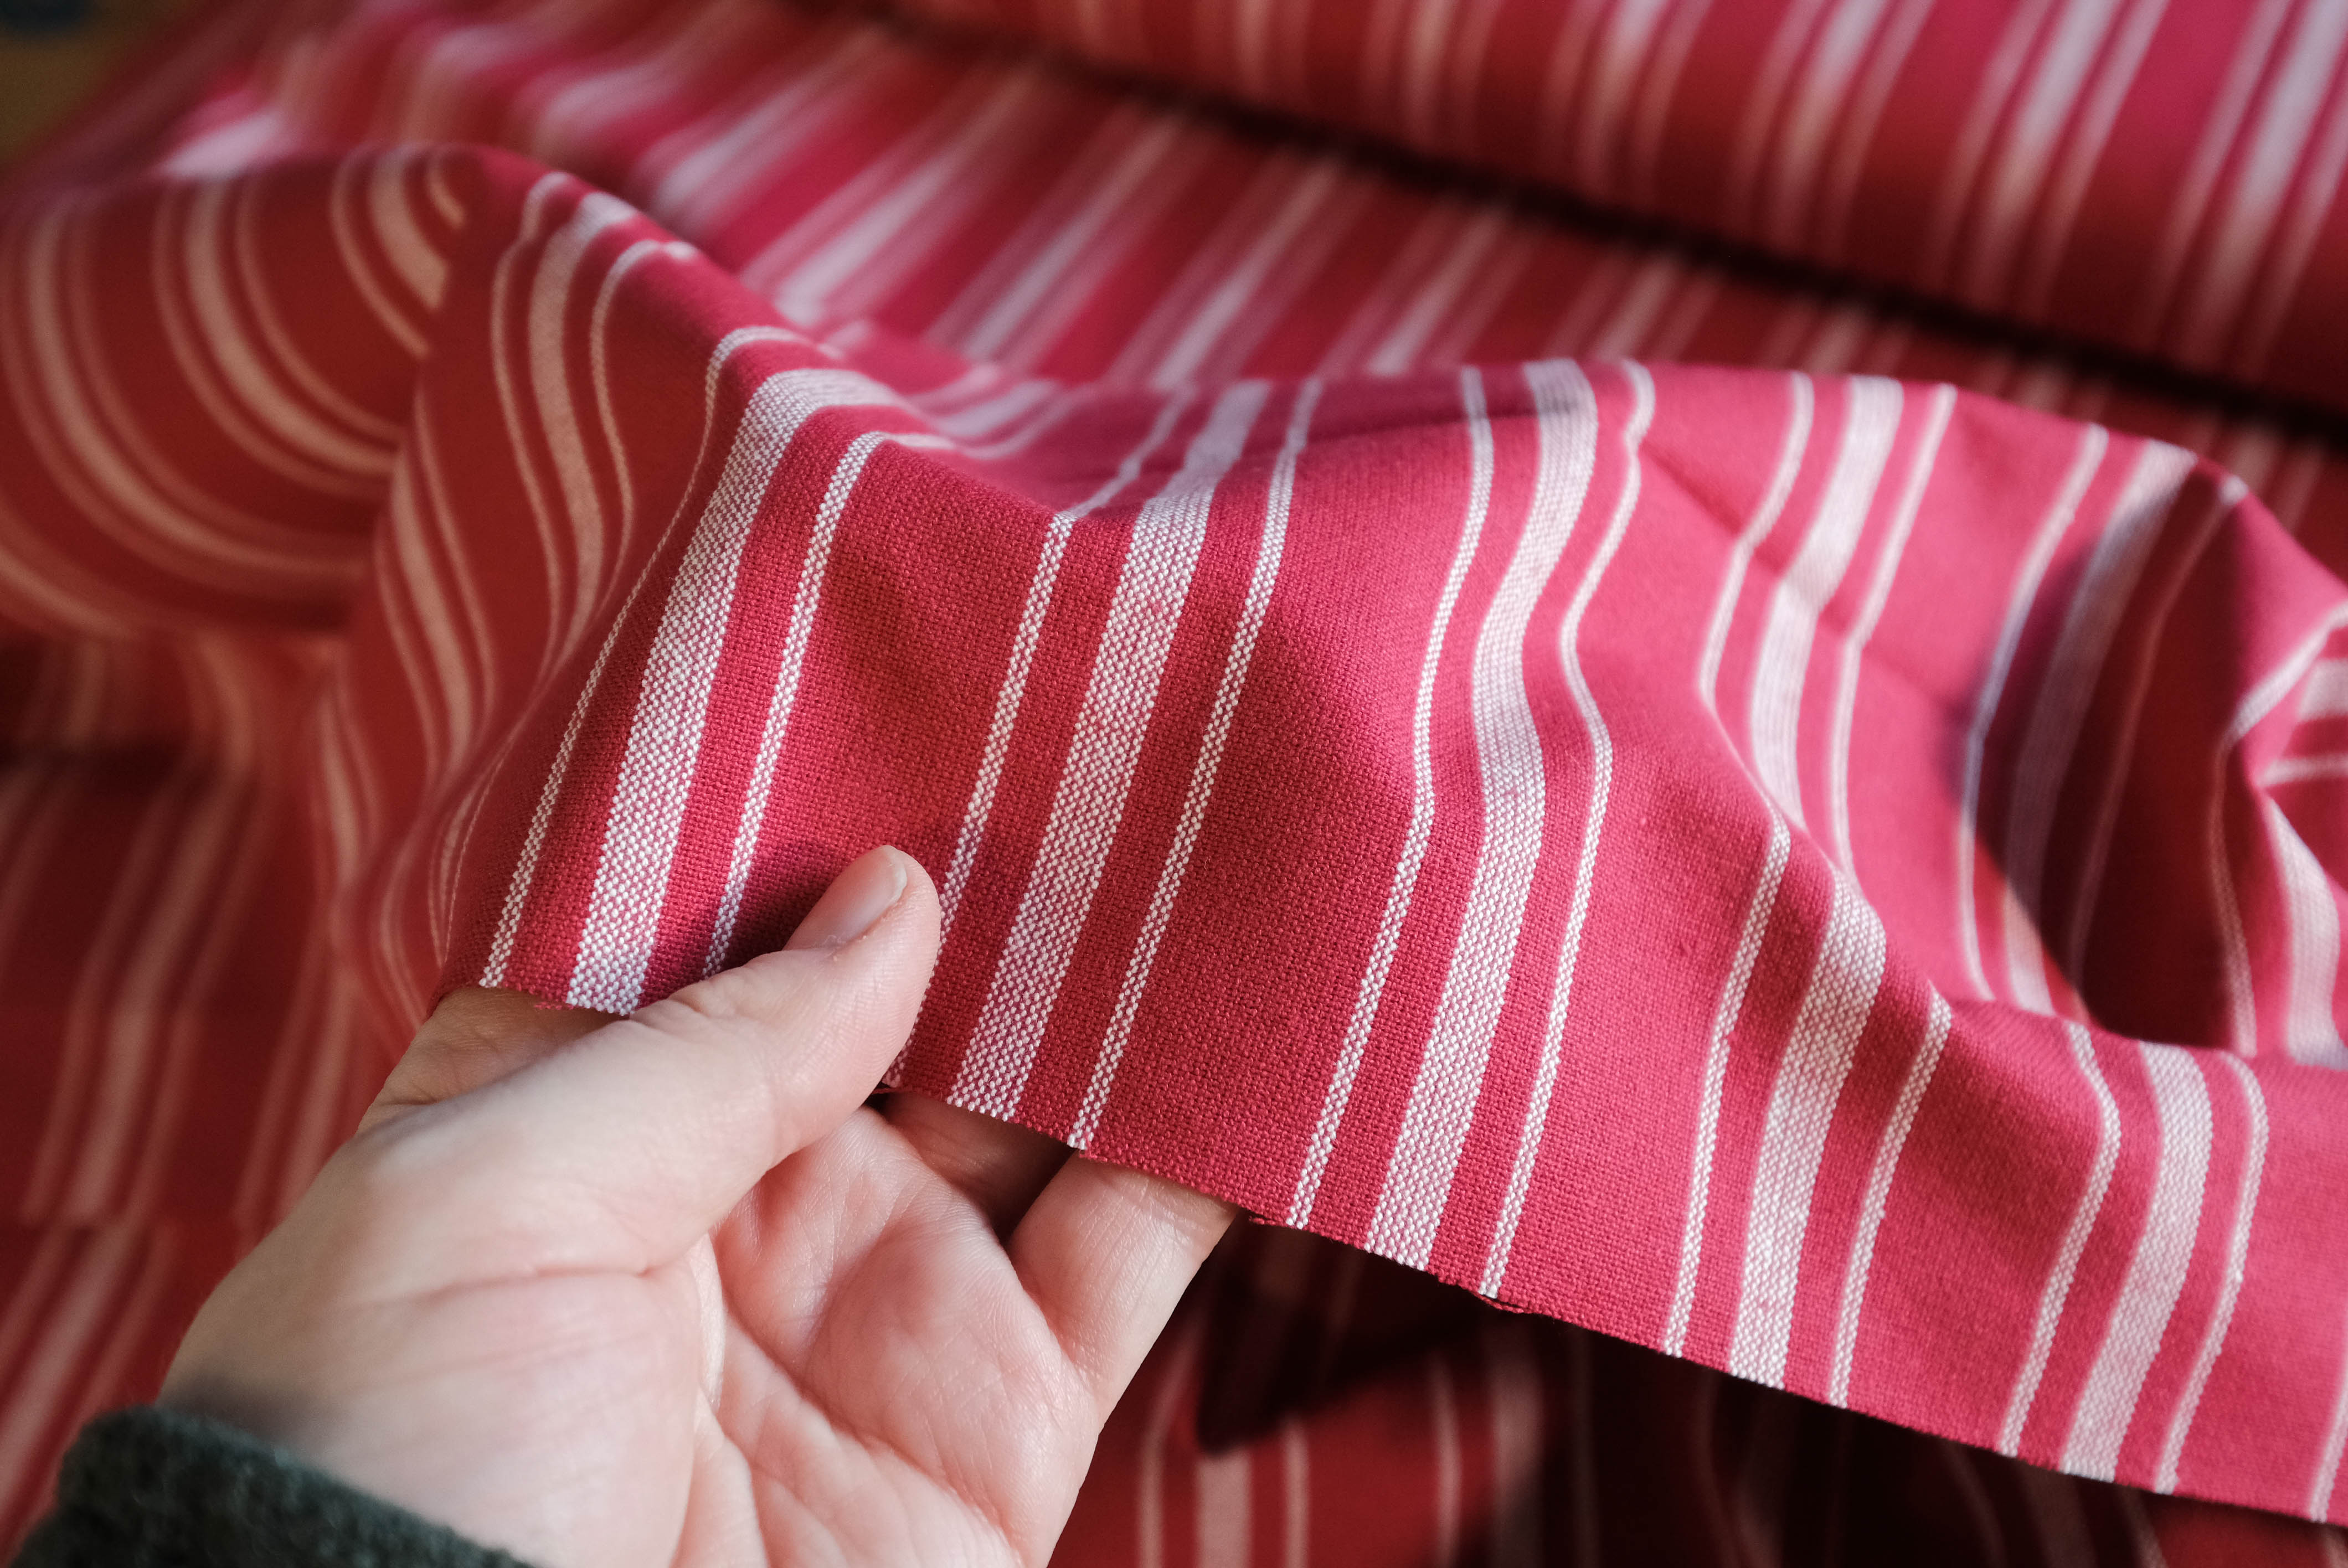 Striped cotton- red and white